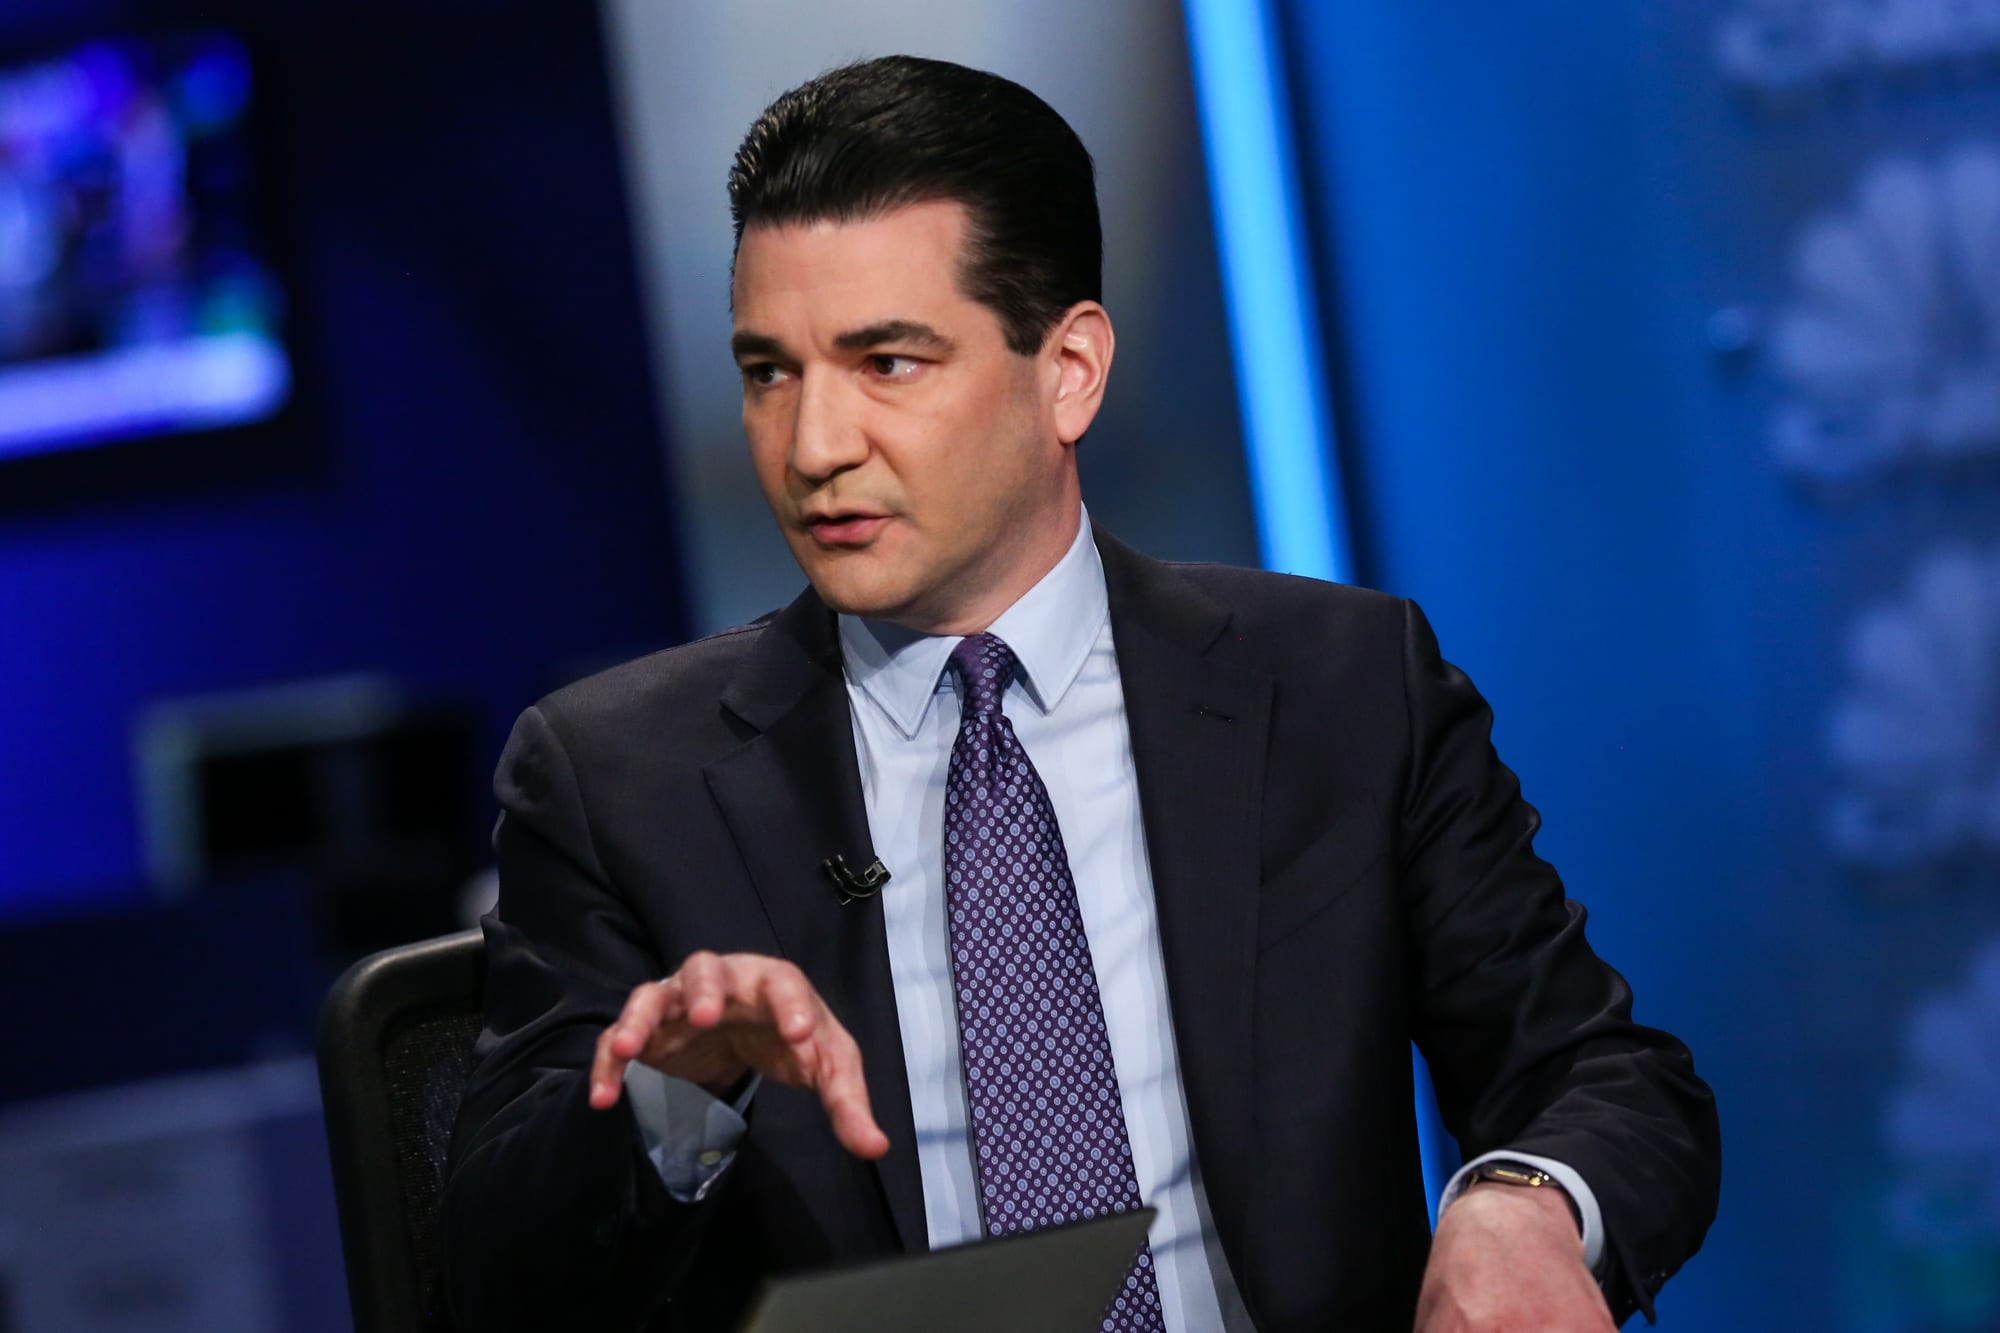 The coronavirus pandemic ‘is about to blow up’ earlier than therapeutic counterattack, Dr. Scott Gottlieb says